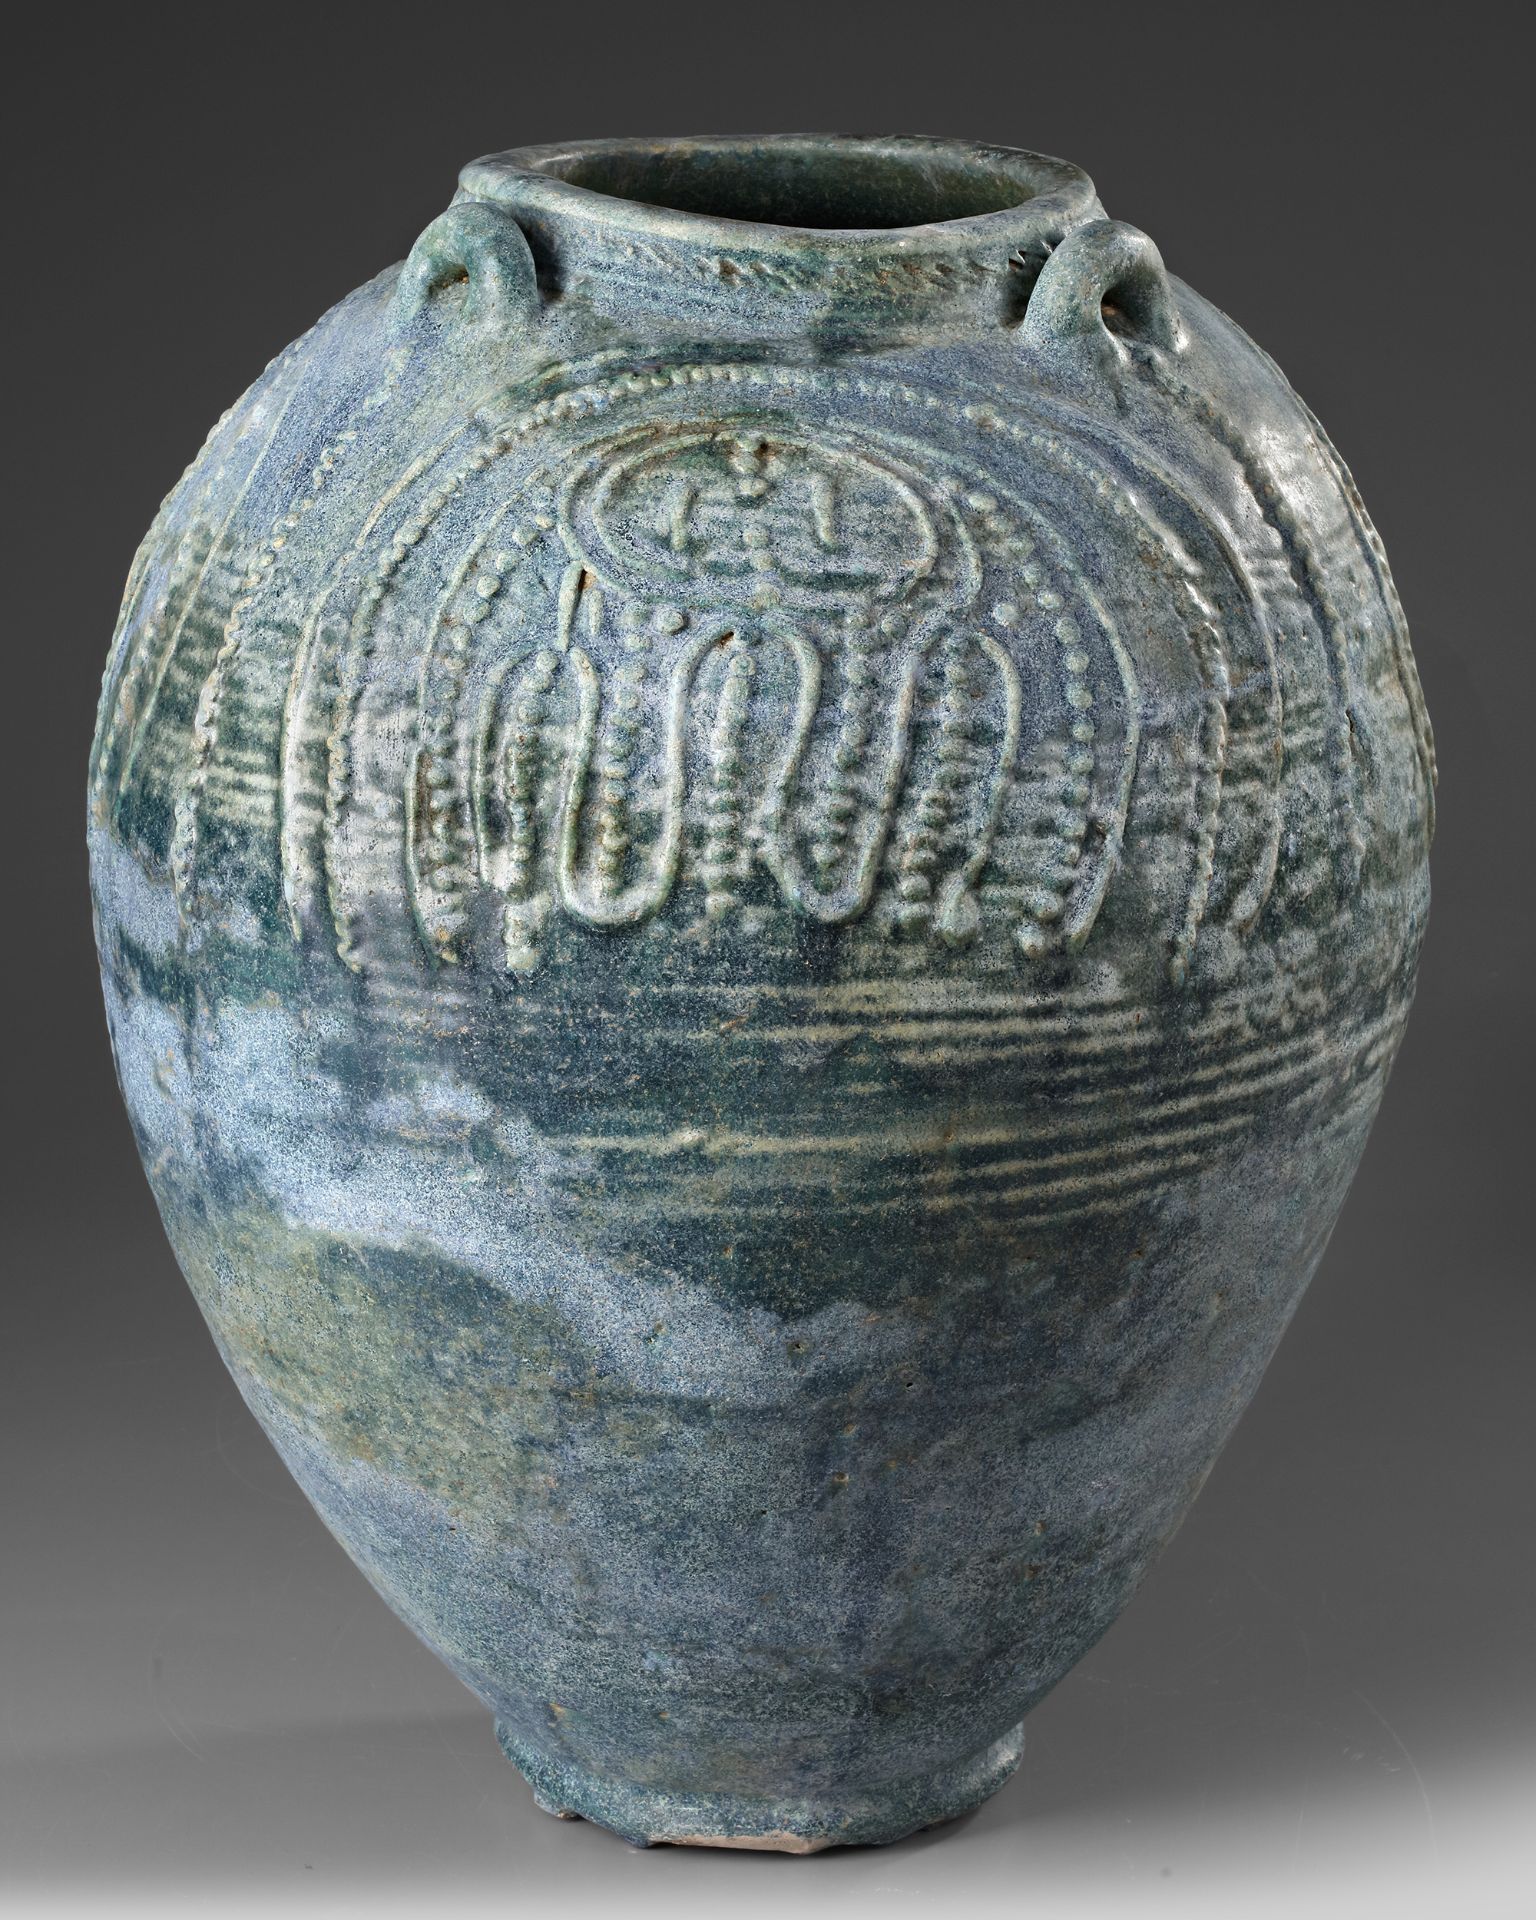 A LARGE POST SASSANIAN TURQUOISE GLAZED POTTERY STORAGE JAR, PERSIA OR IRAQ, 7TH-8TH CENTURY - Image 3 of 5